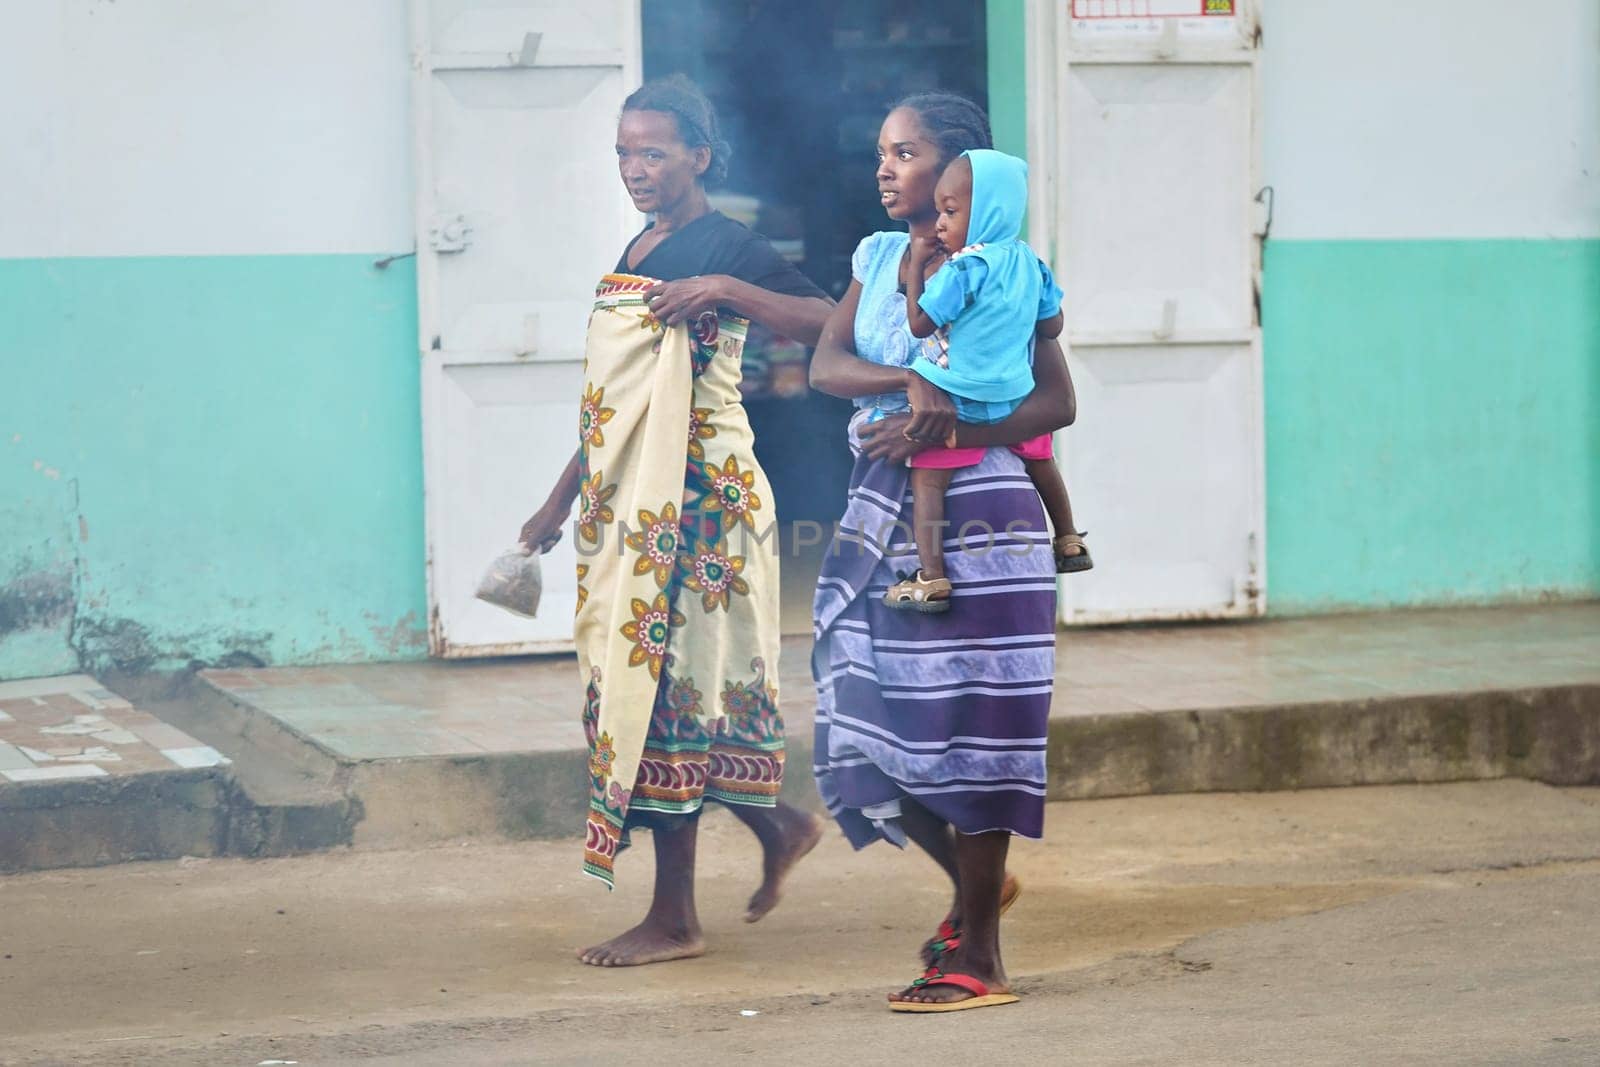 Ranohira, Madagascar - April 29, 2019: Two unknown Malagasy women walking on main street, one carrying her baby. People of Madagascar are poor but look content nevertheless